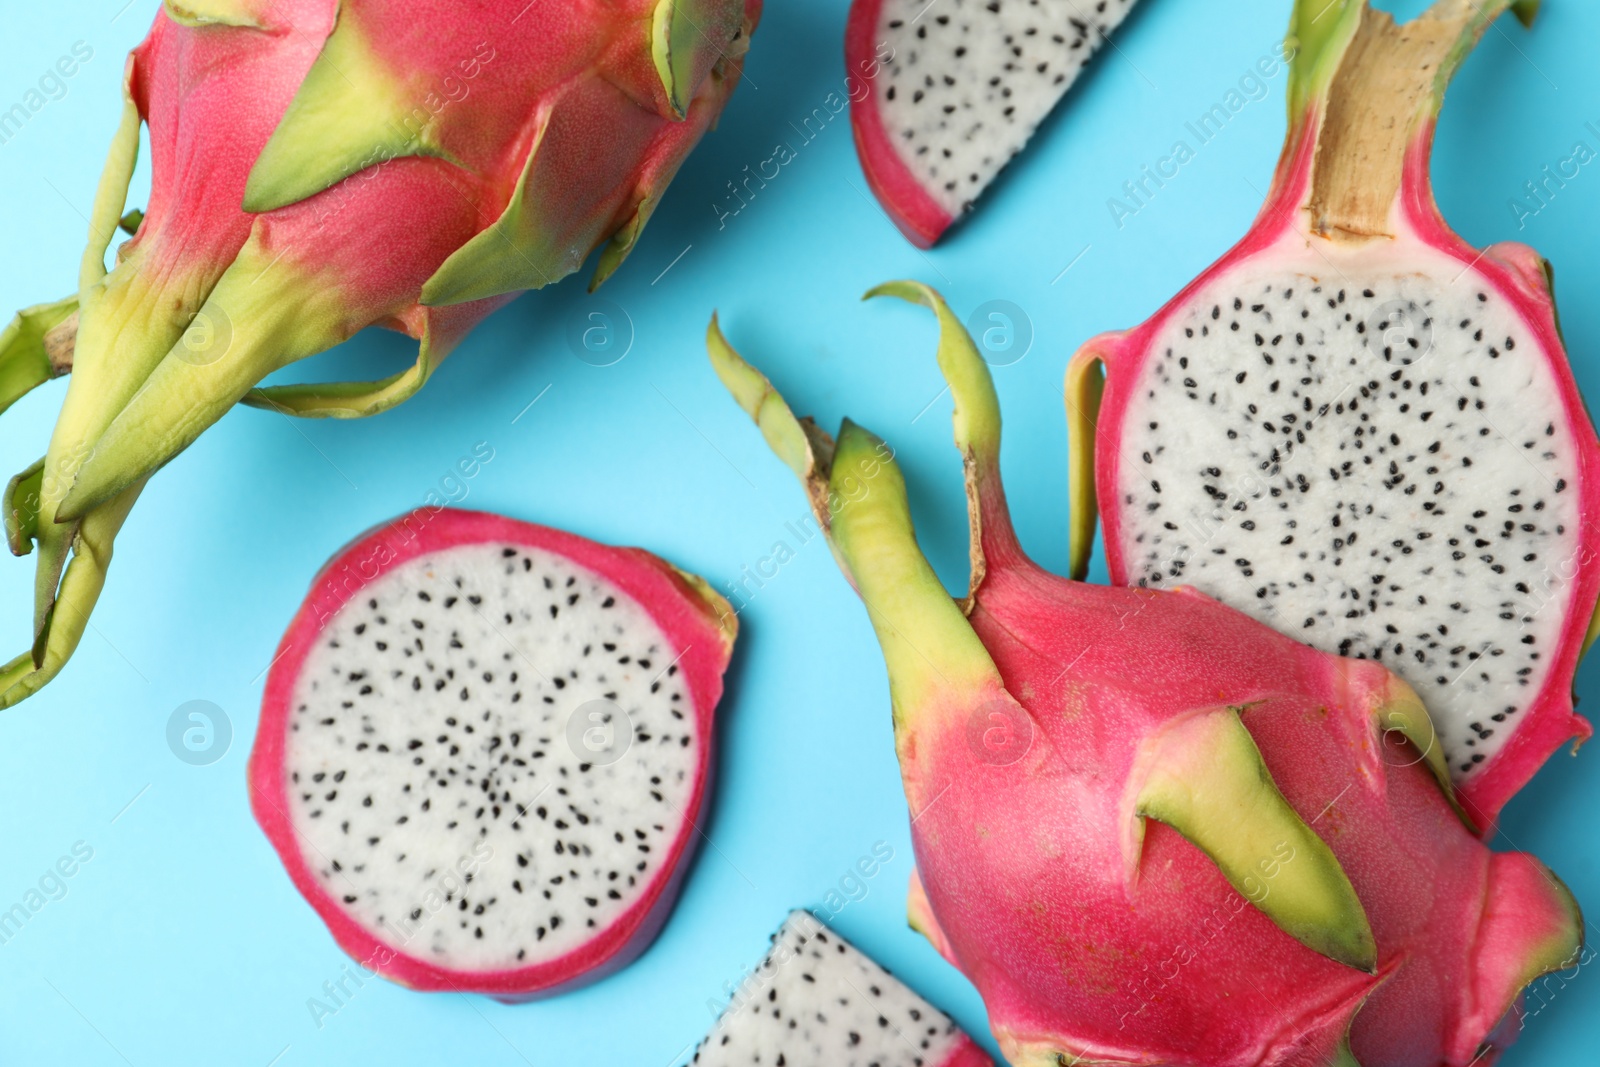 Photo of Delicious cut and whole dragon fruits (pitahaya) on light blue background, flat lay